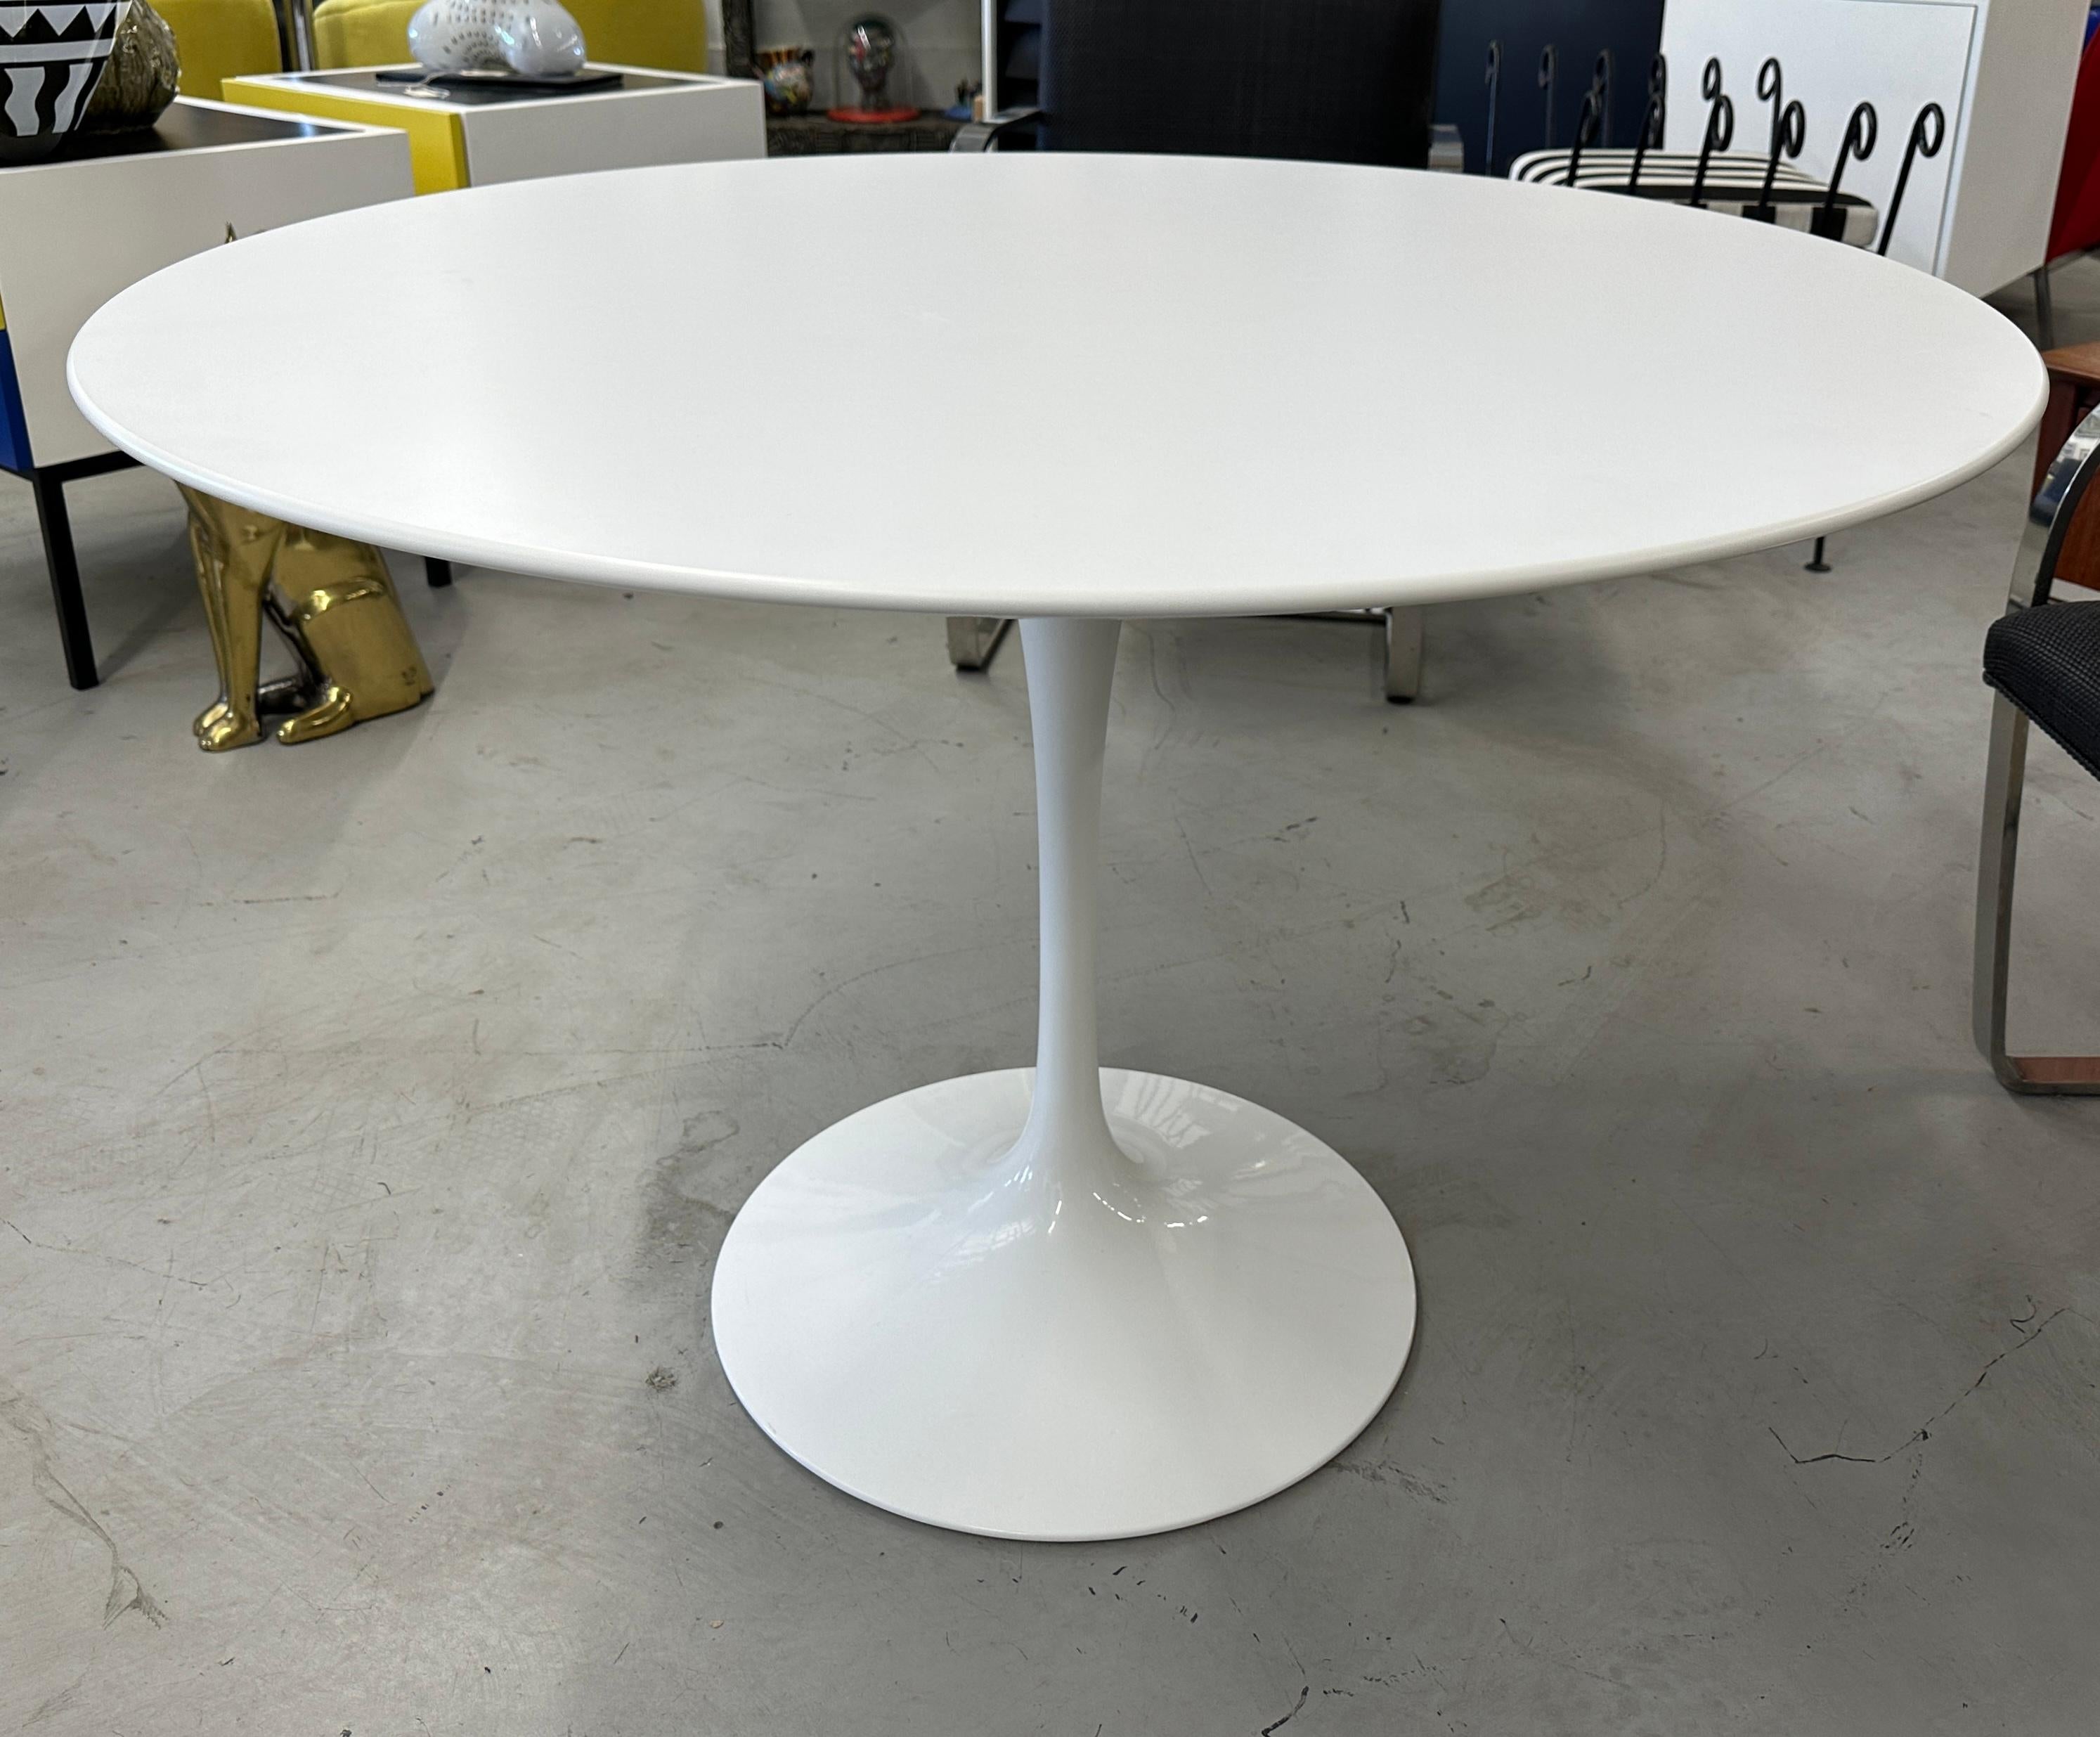 A Knoll white laminate pedestal table designed by Eero Saarinen. An iconic design this table is of recent manufacture circa 2010 or so. The table is in good condition with some minor marks from handling. It is pictured in our gallery with 4 Mies Van